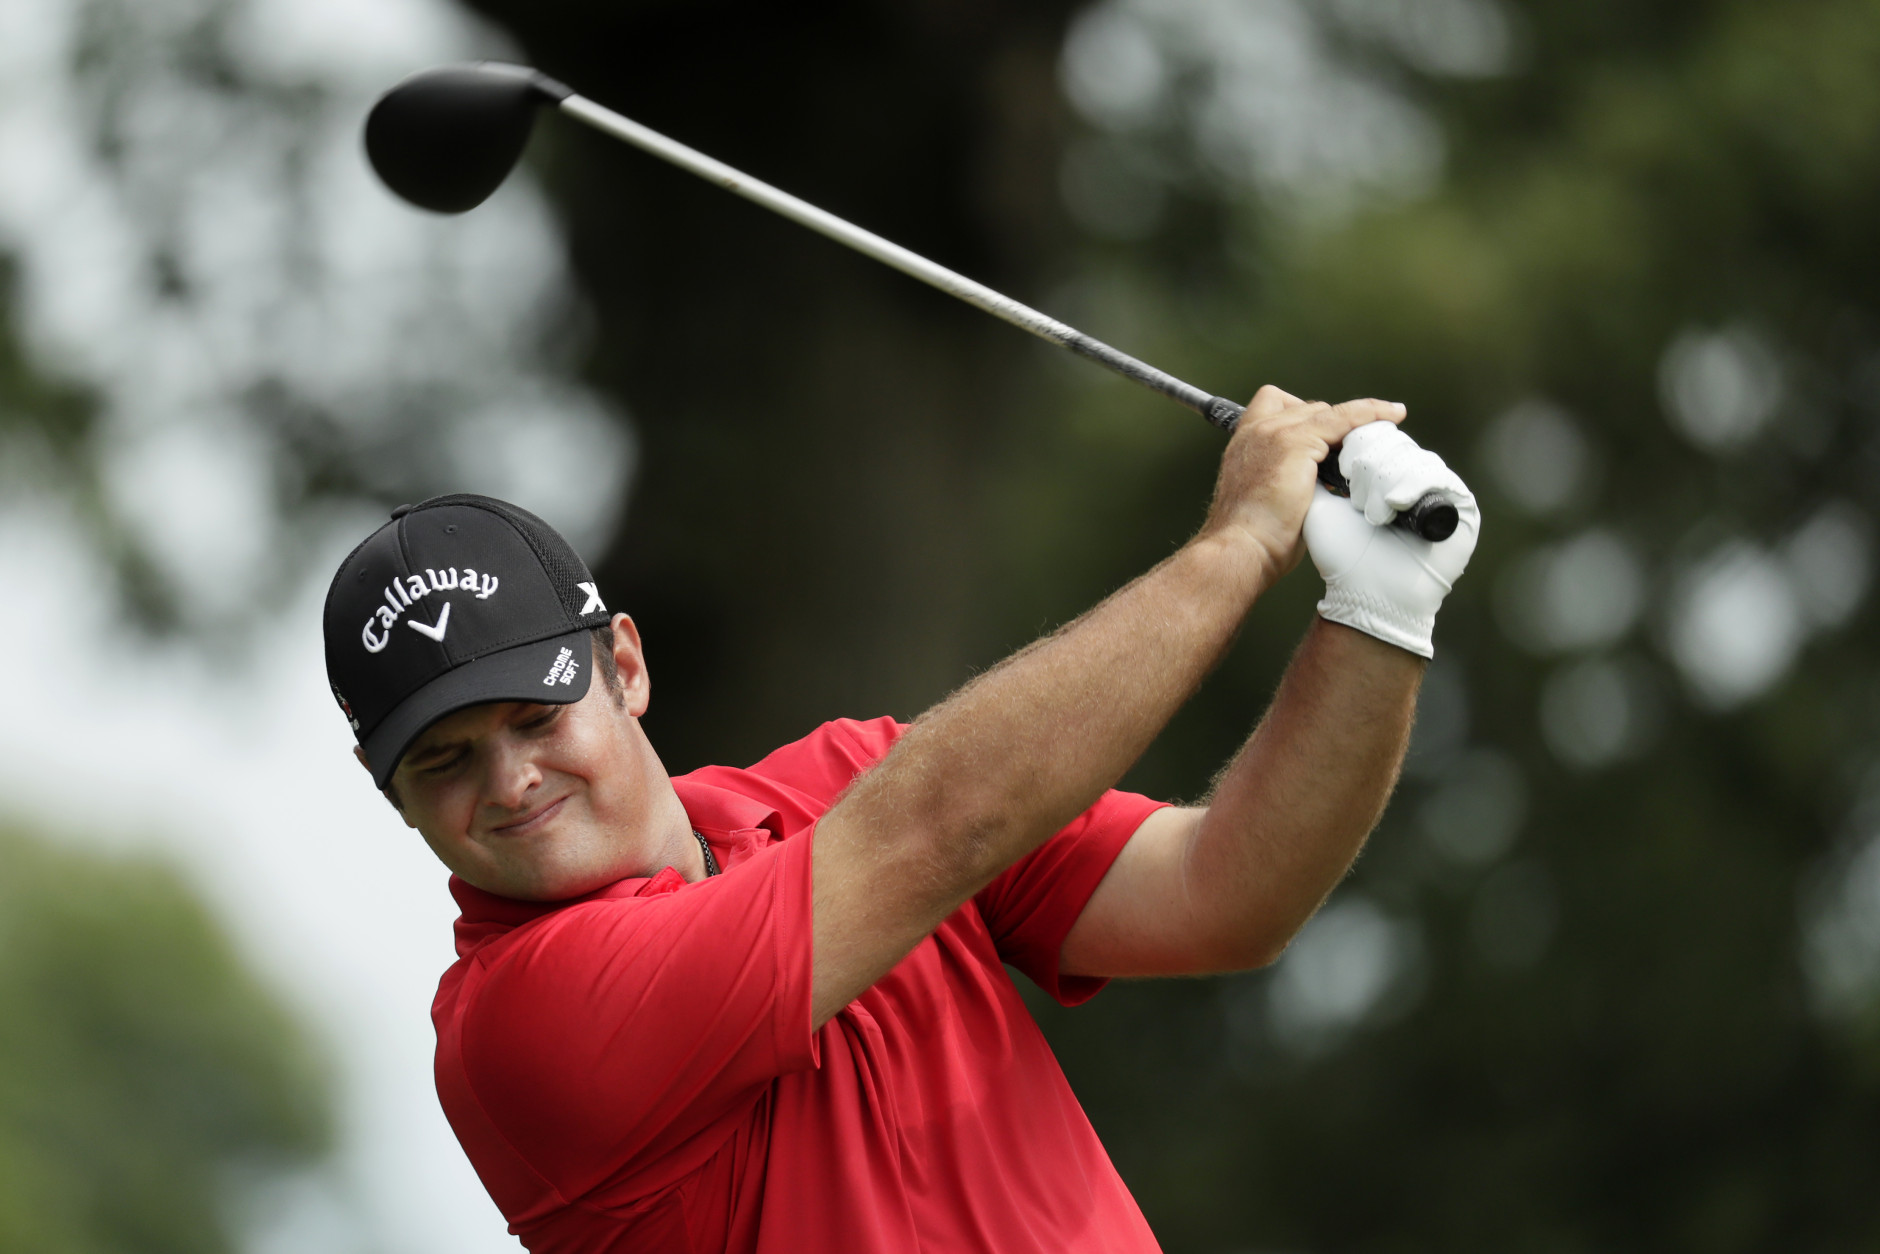 BETHESDA, MD - JUNE 23:  Patrick Reed plays a shot from fourth tee during the first round of the Quicken Loans National at Congressional Country Club on June 23, 2016 in Bethesda, Maryland.  (Photo by Rob Carr/Getty Images)